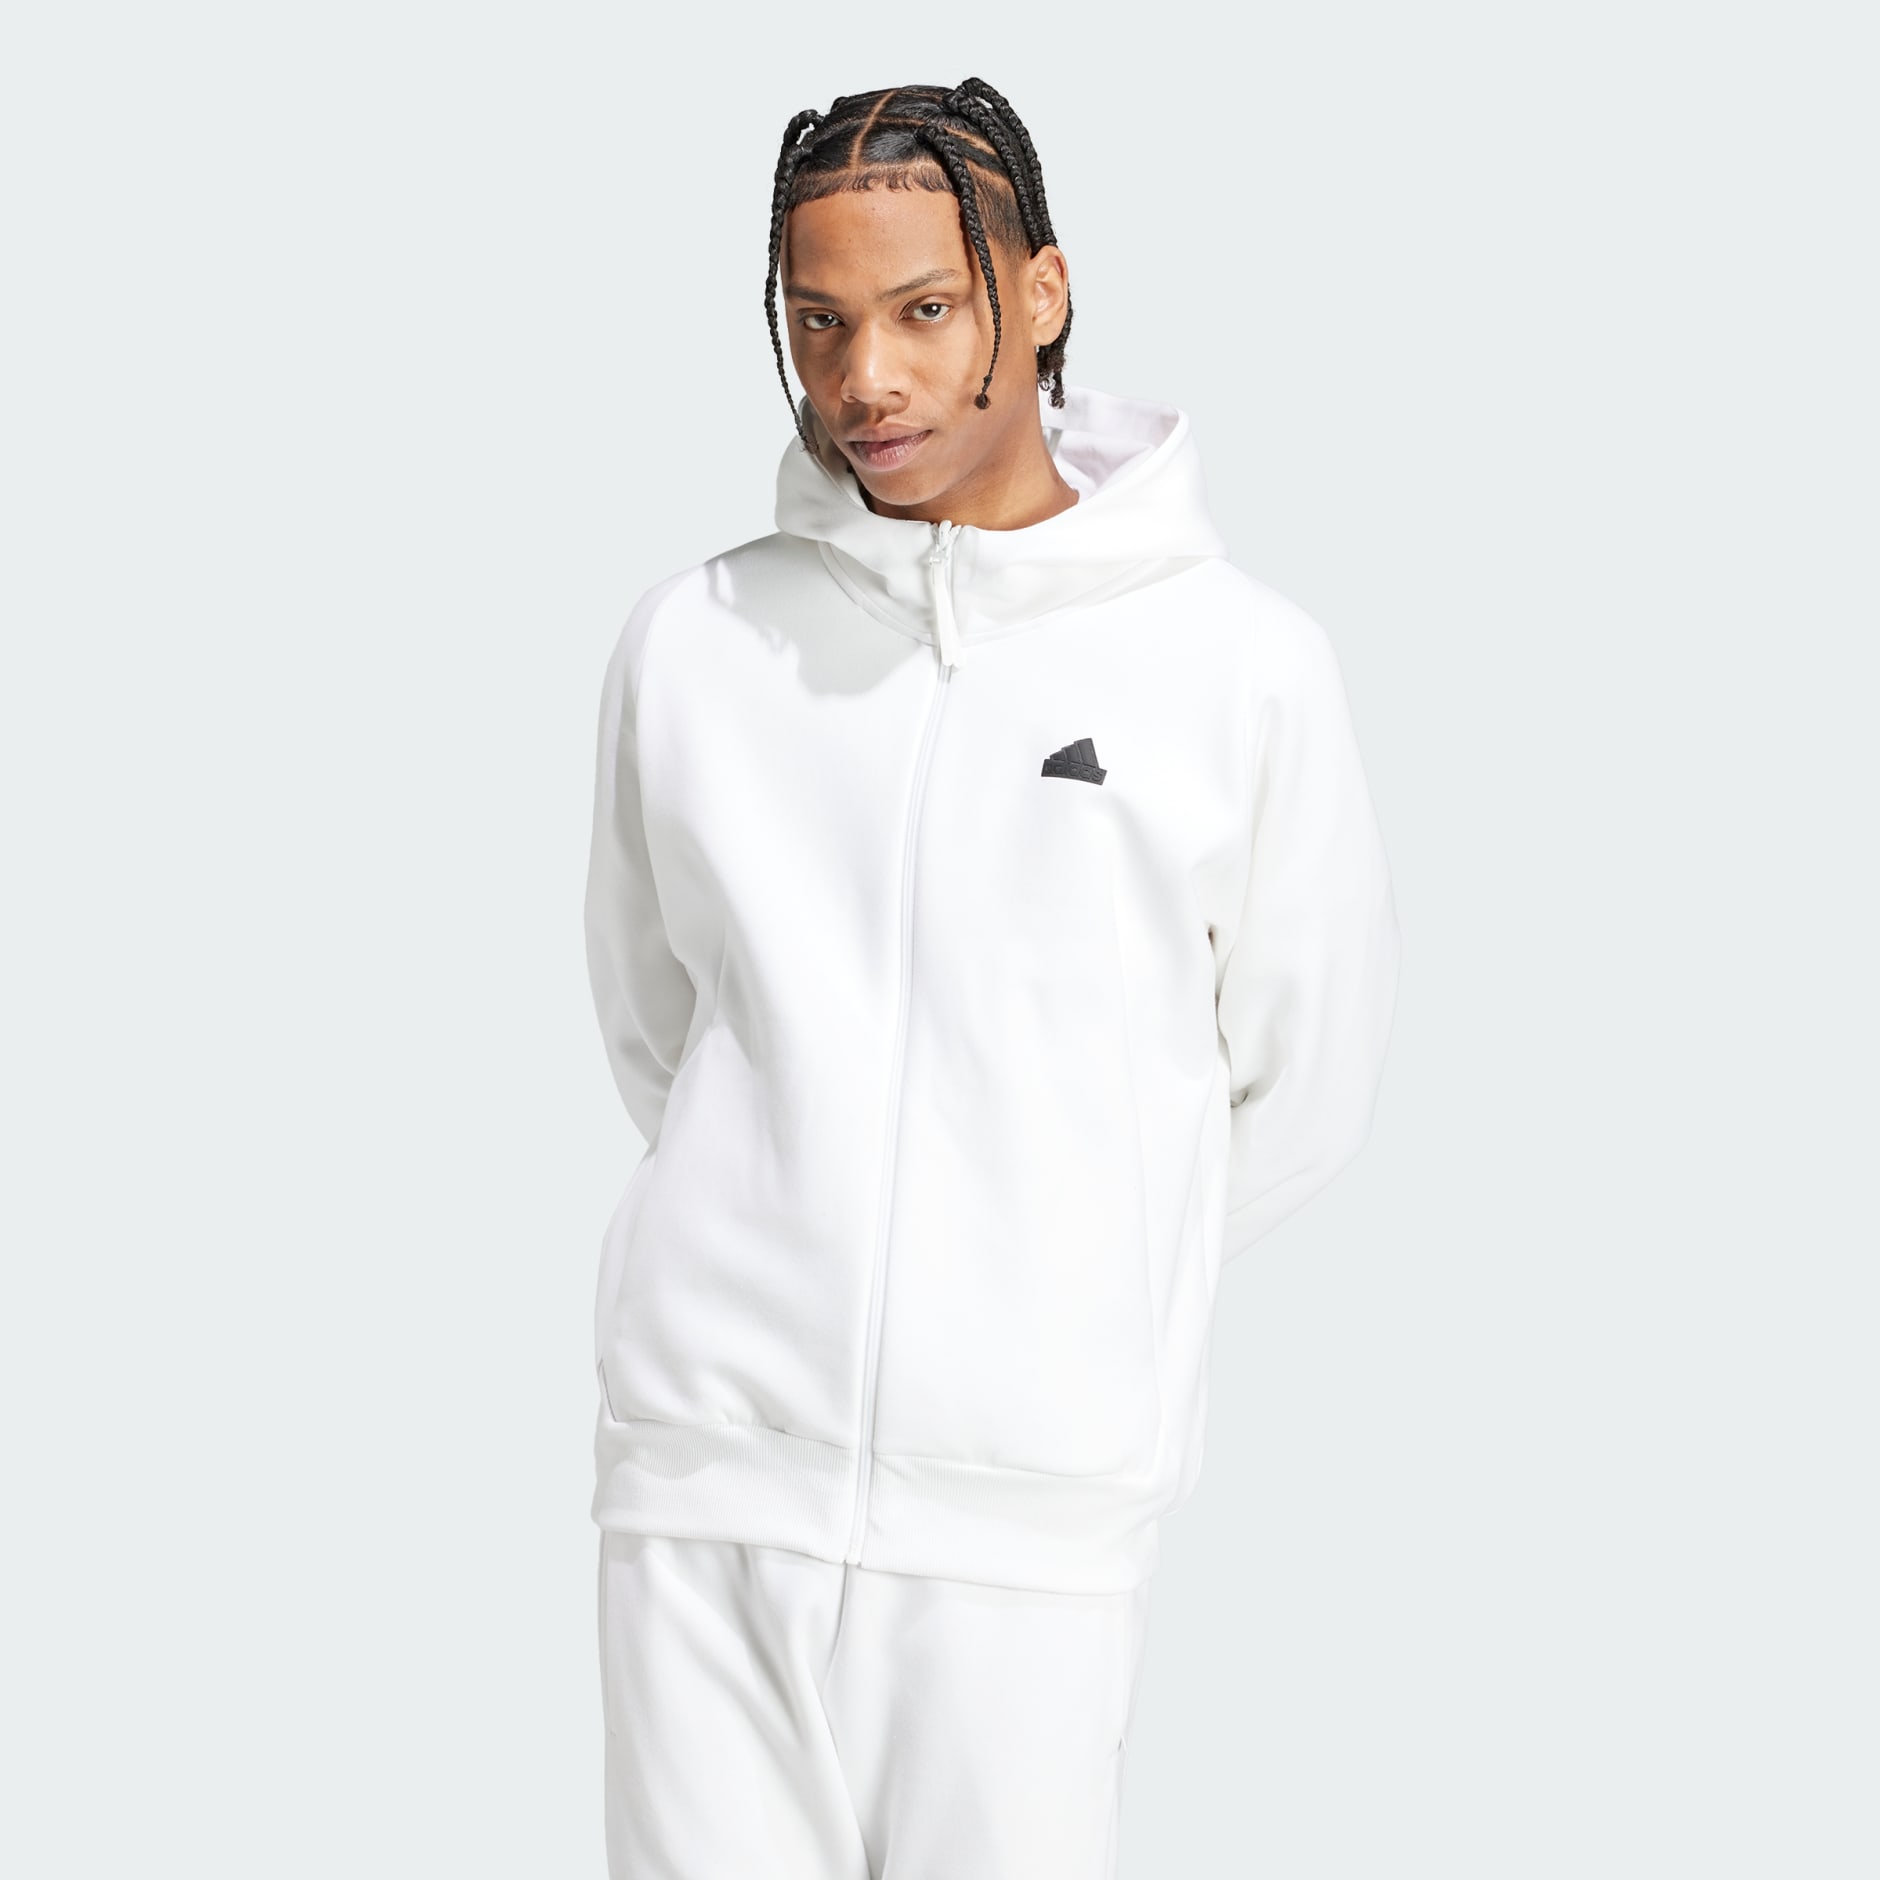 Grijp Wacht even Ambacht Men's Clothing - Z.N.E. Premium Full-Zip Hooded Track Jacket - White |  adidas Oman